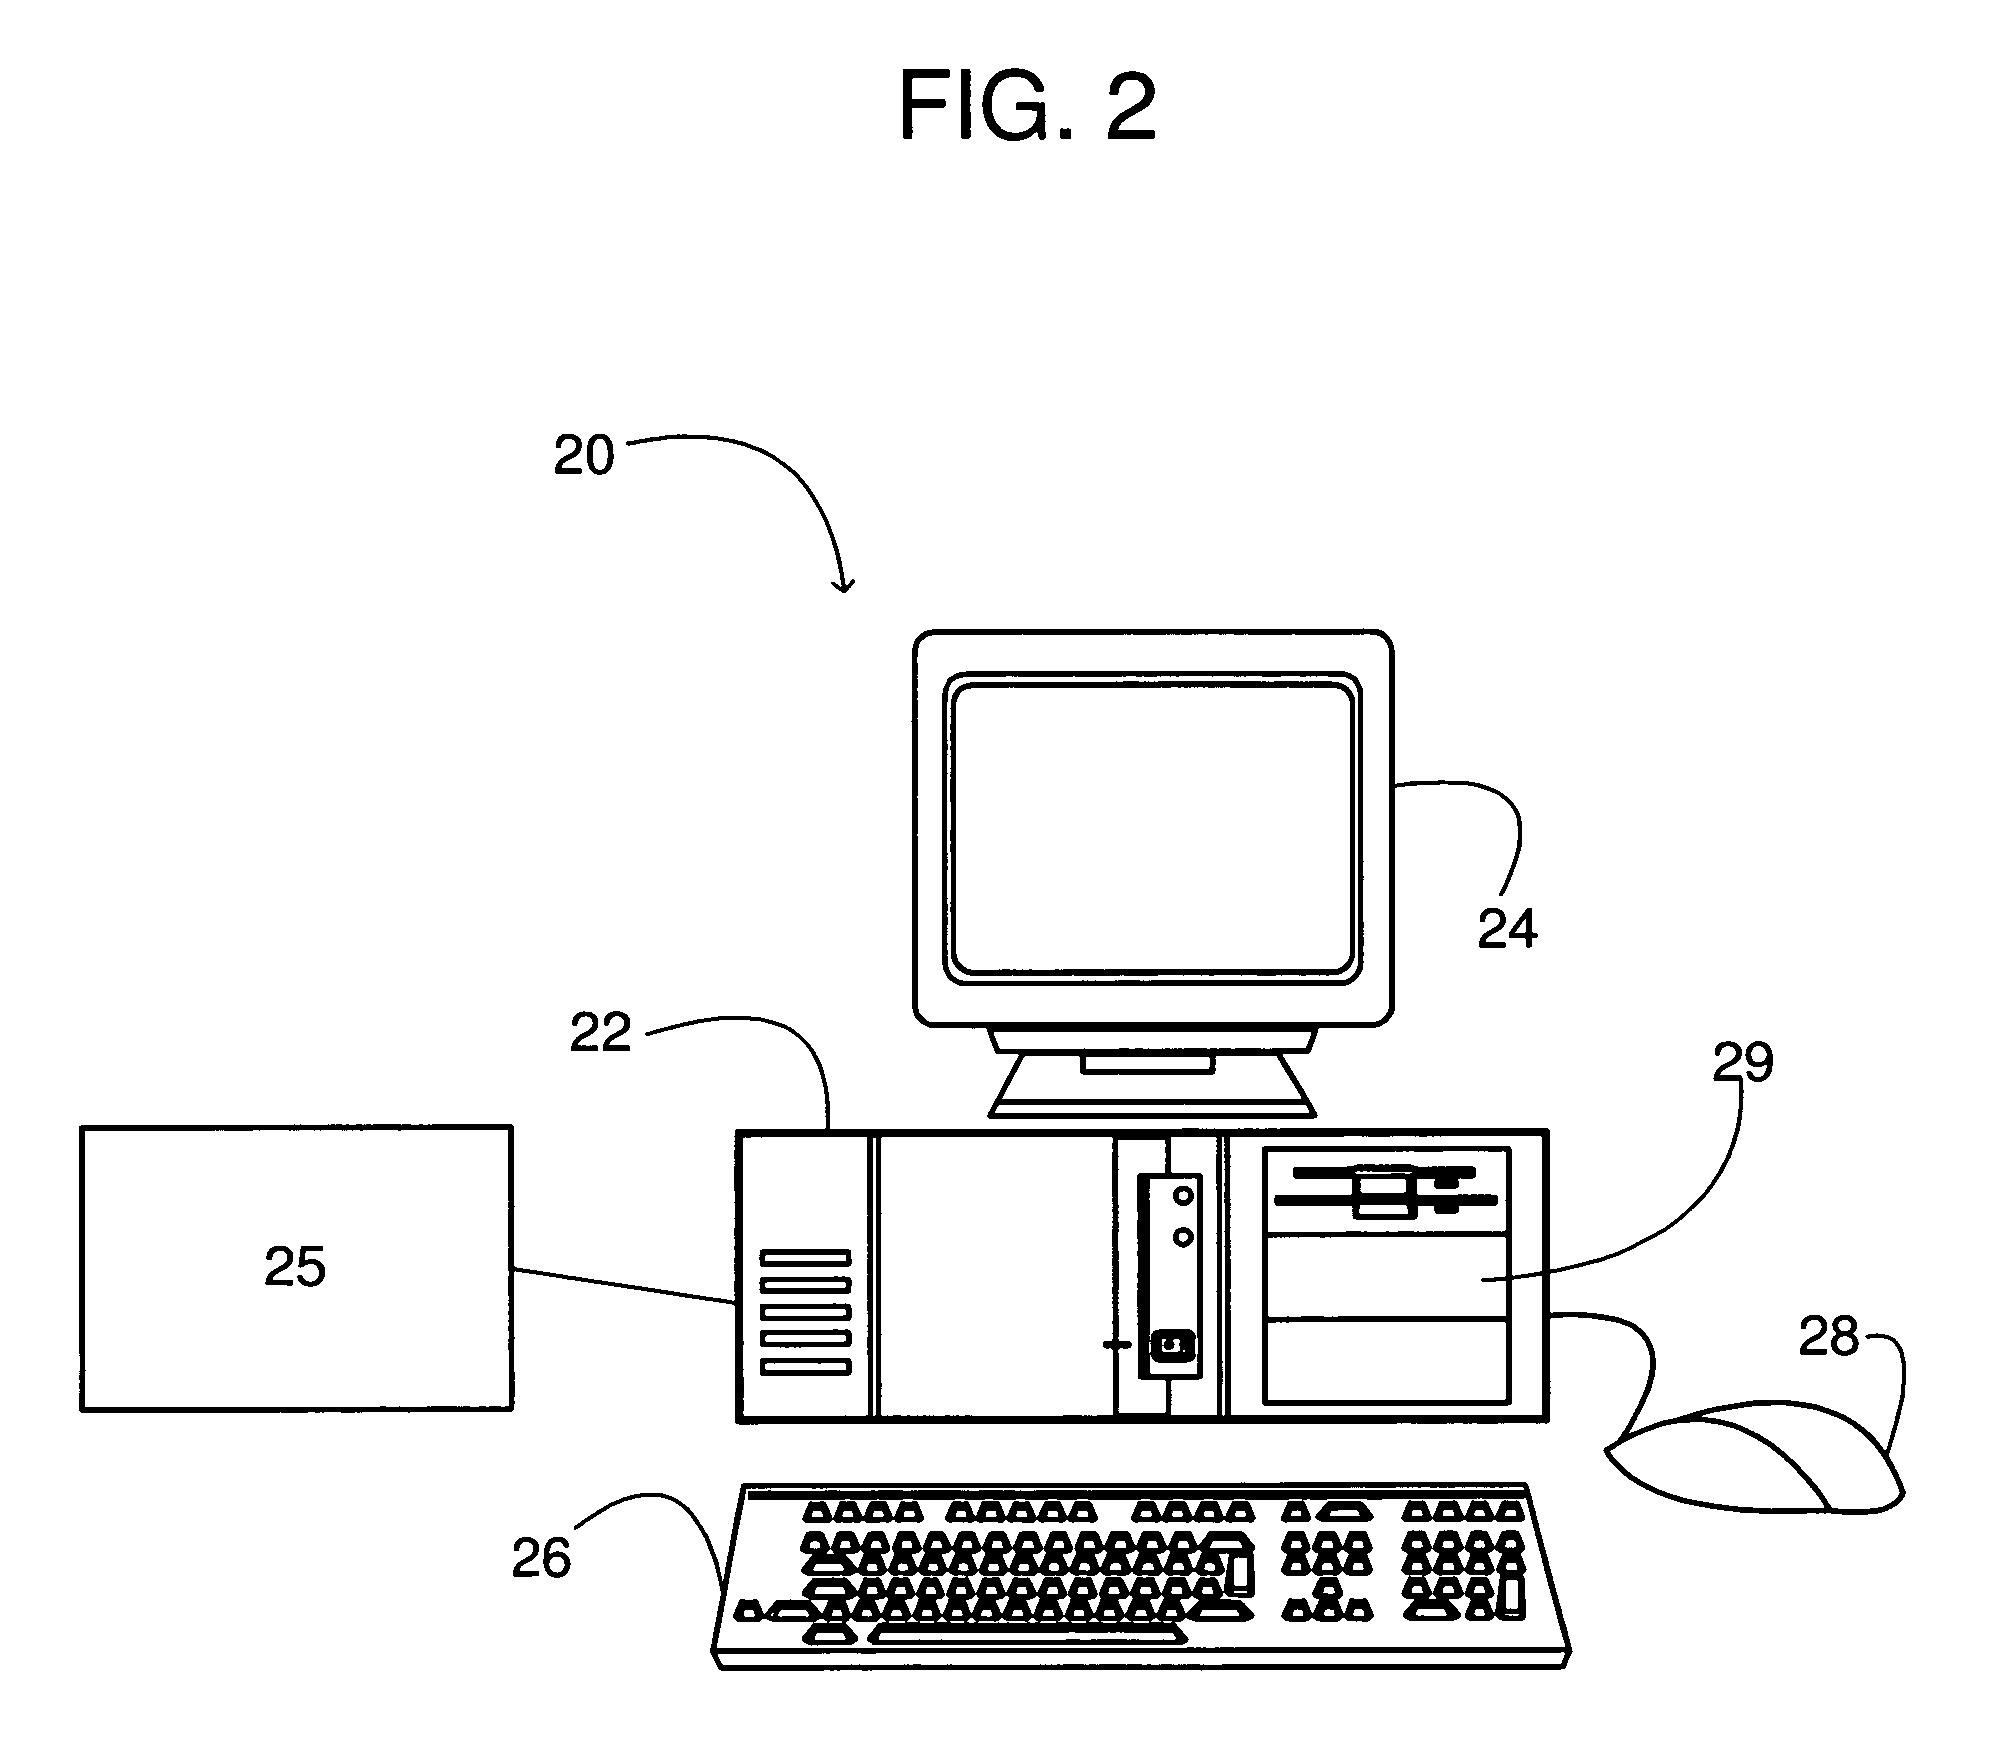 Browser interface and network based financial service system